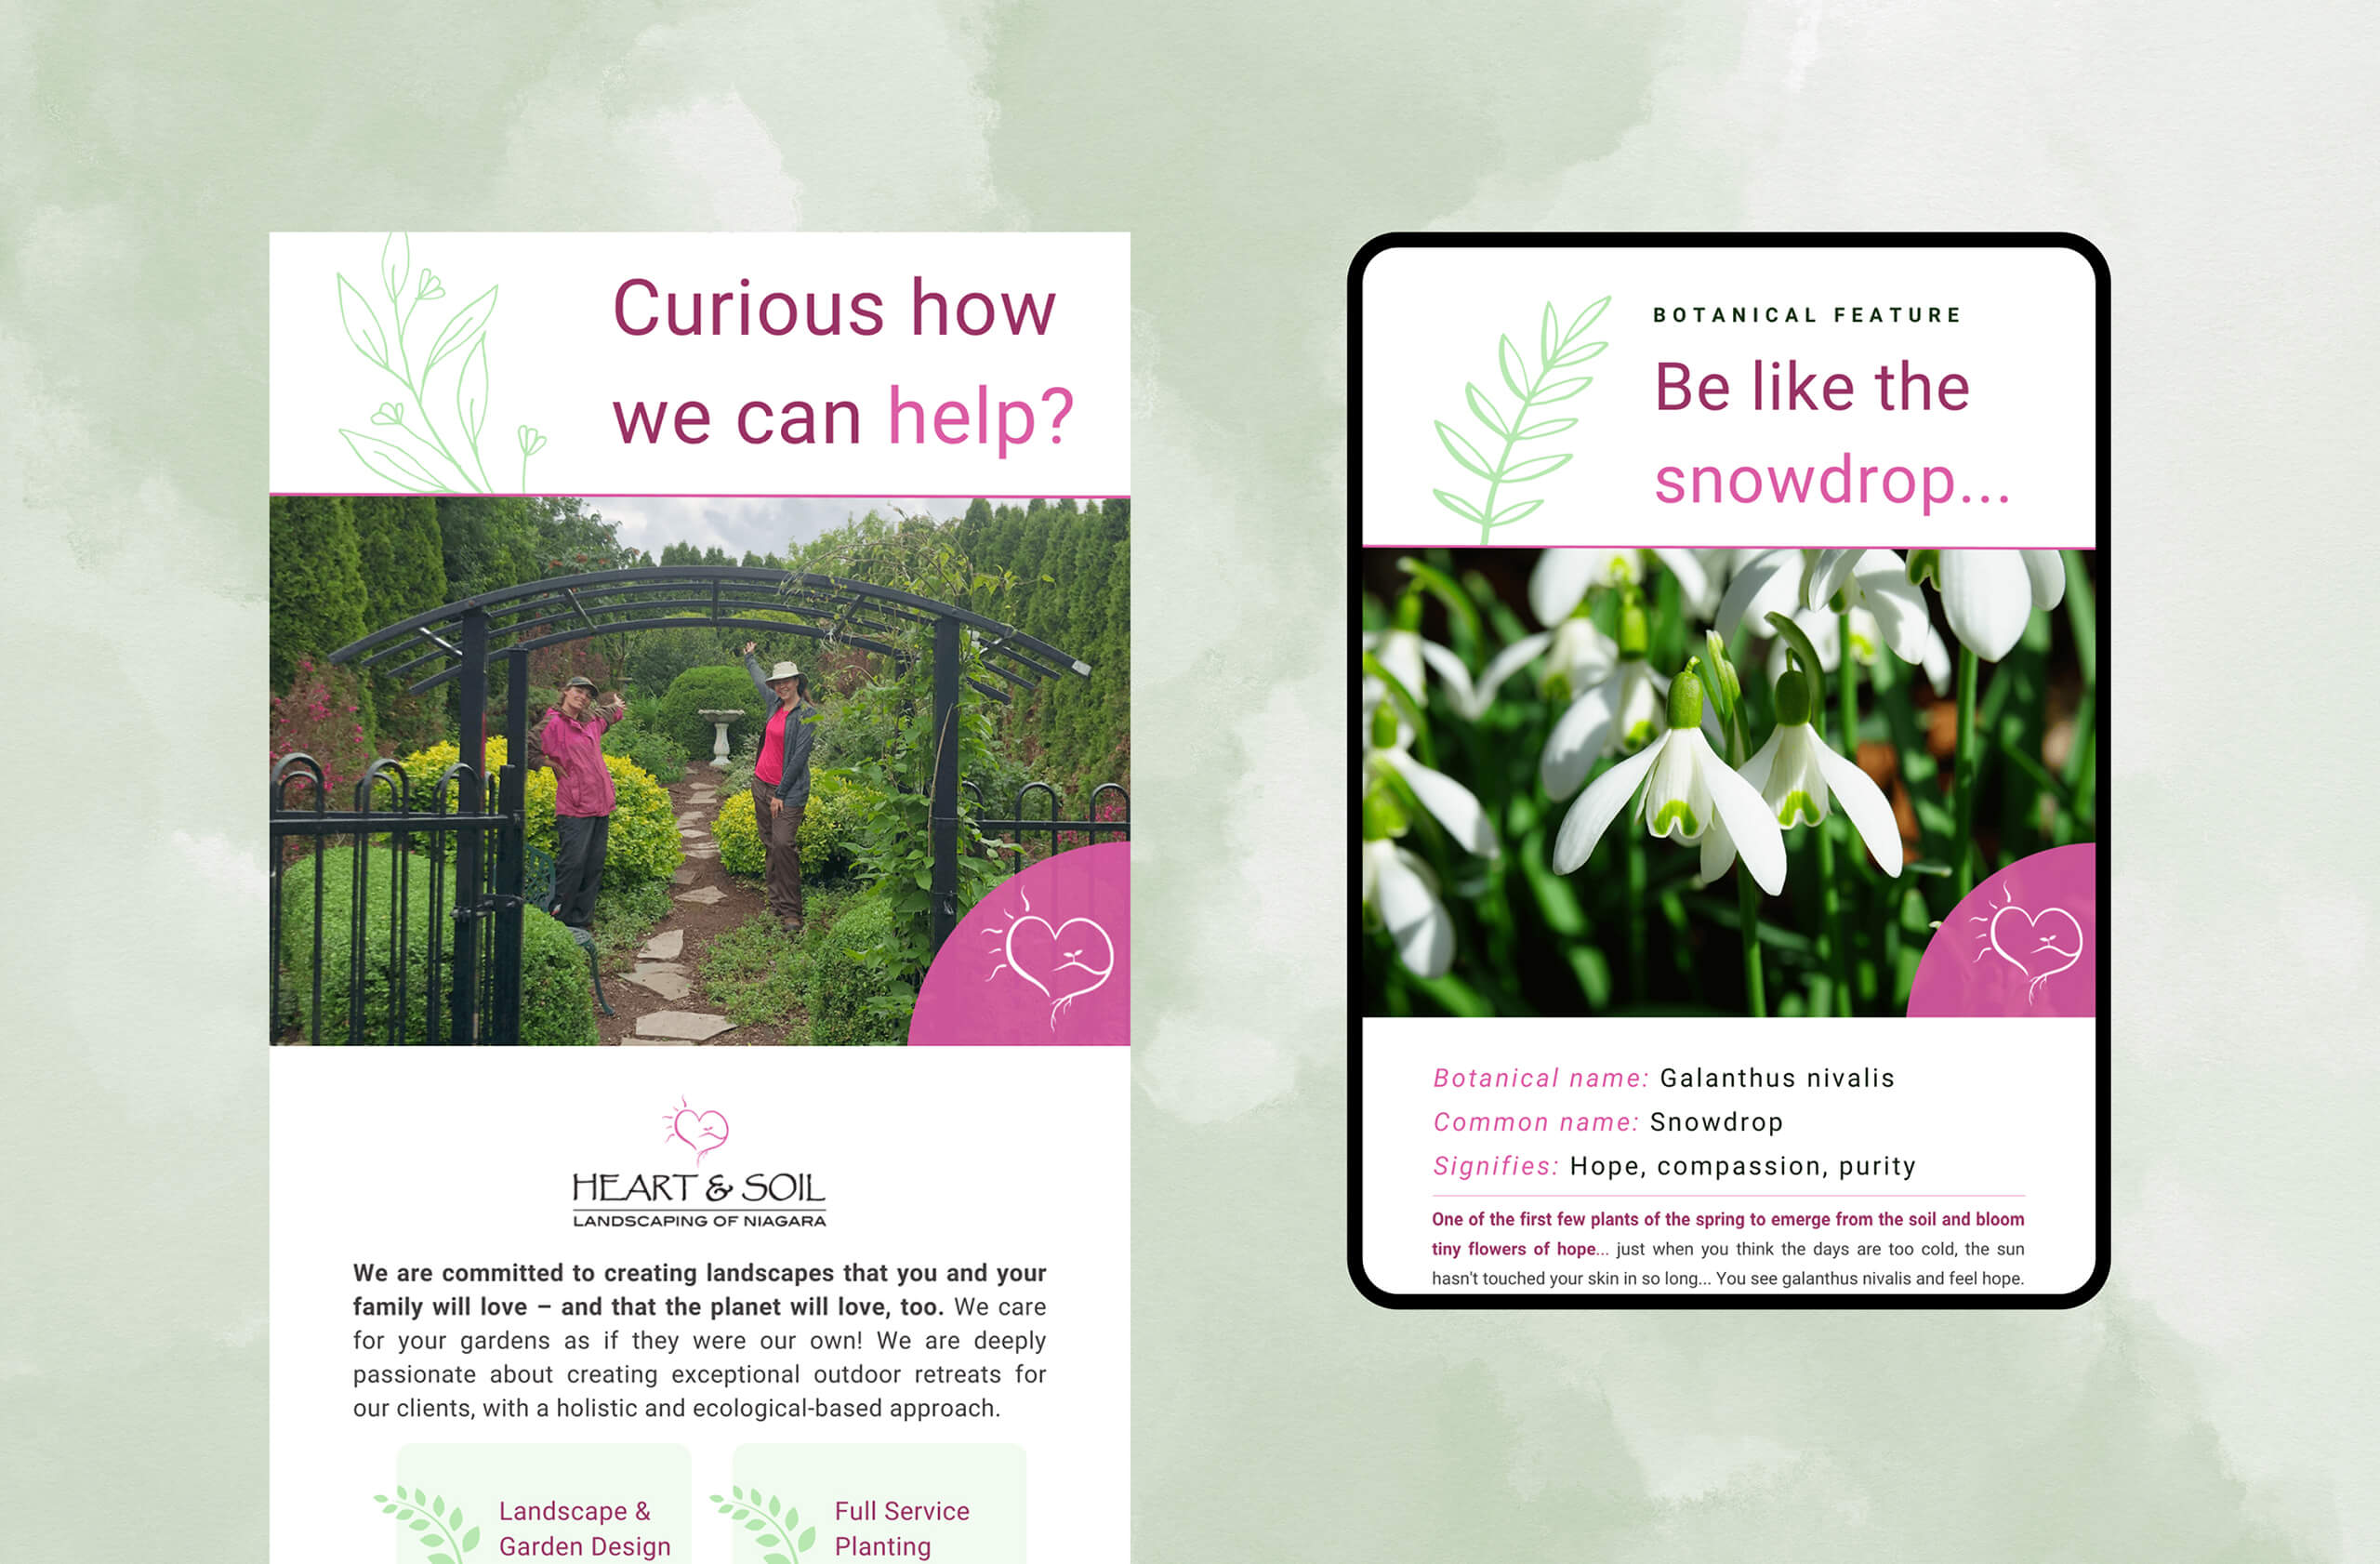 Email and Social Media Marketing for Heart and Soil Landscaping of Niagara designed by Tulip Tree Creative